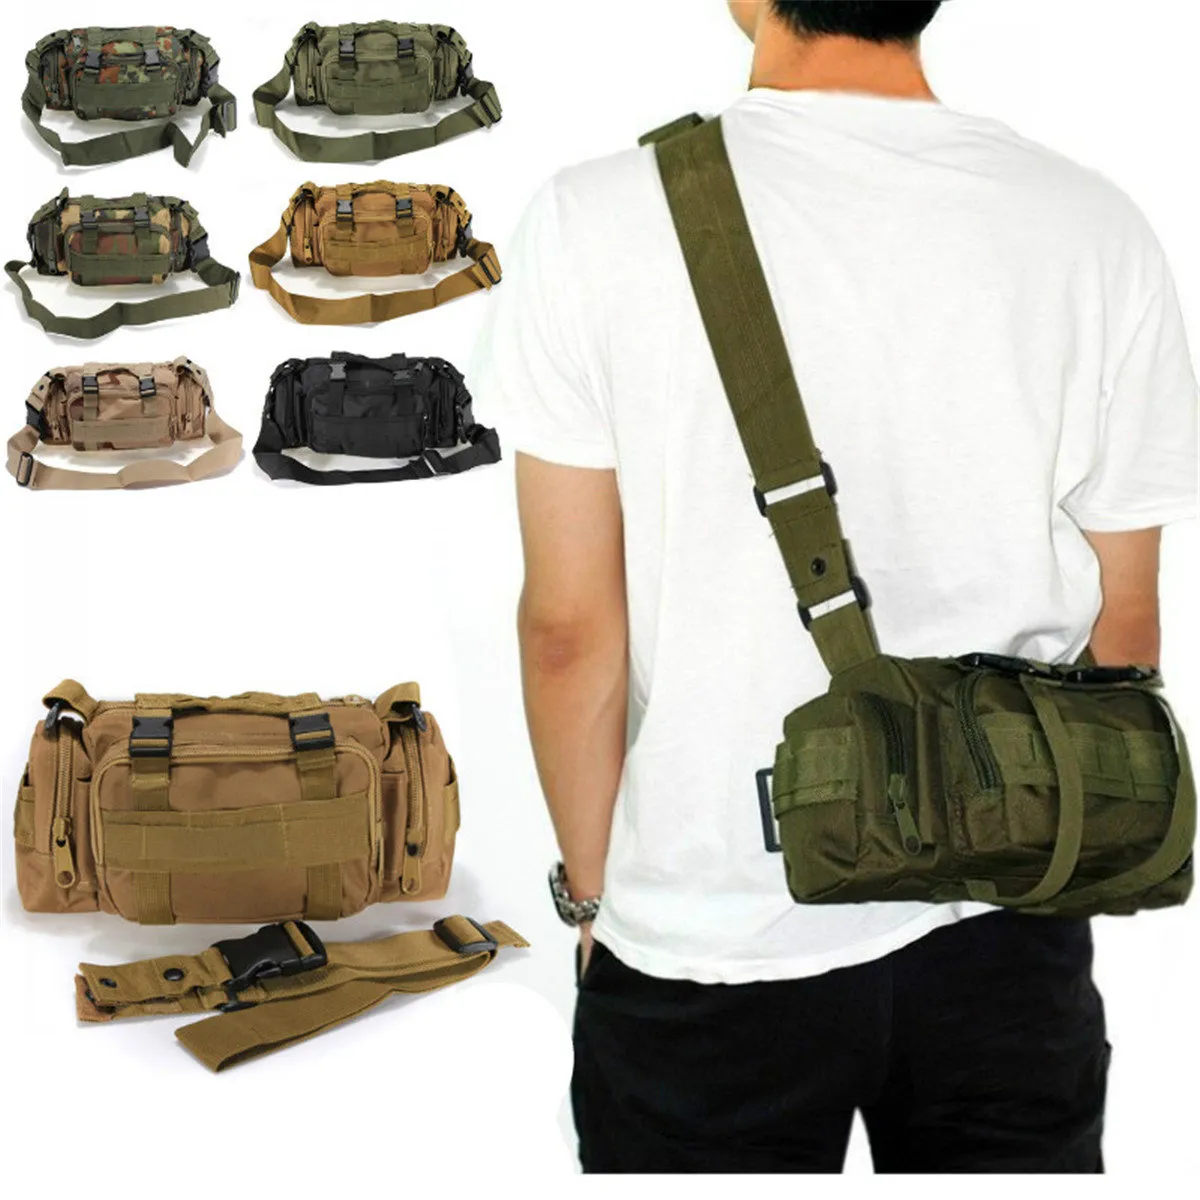 Outdoor Sports Camouflage Backpack Rucksack Camping Hiking Waist Bag Pack- multi color option For Travelling With Many Pockets